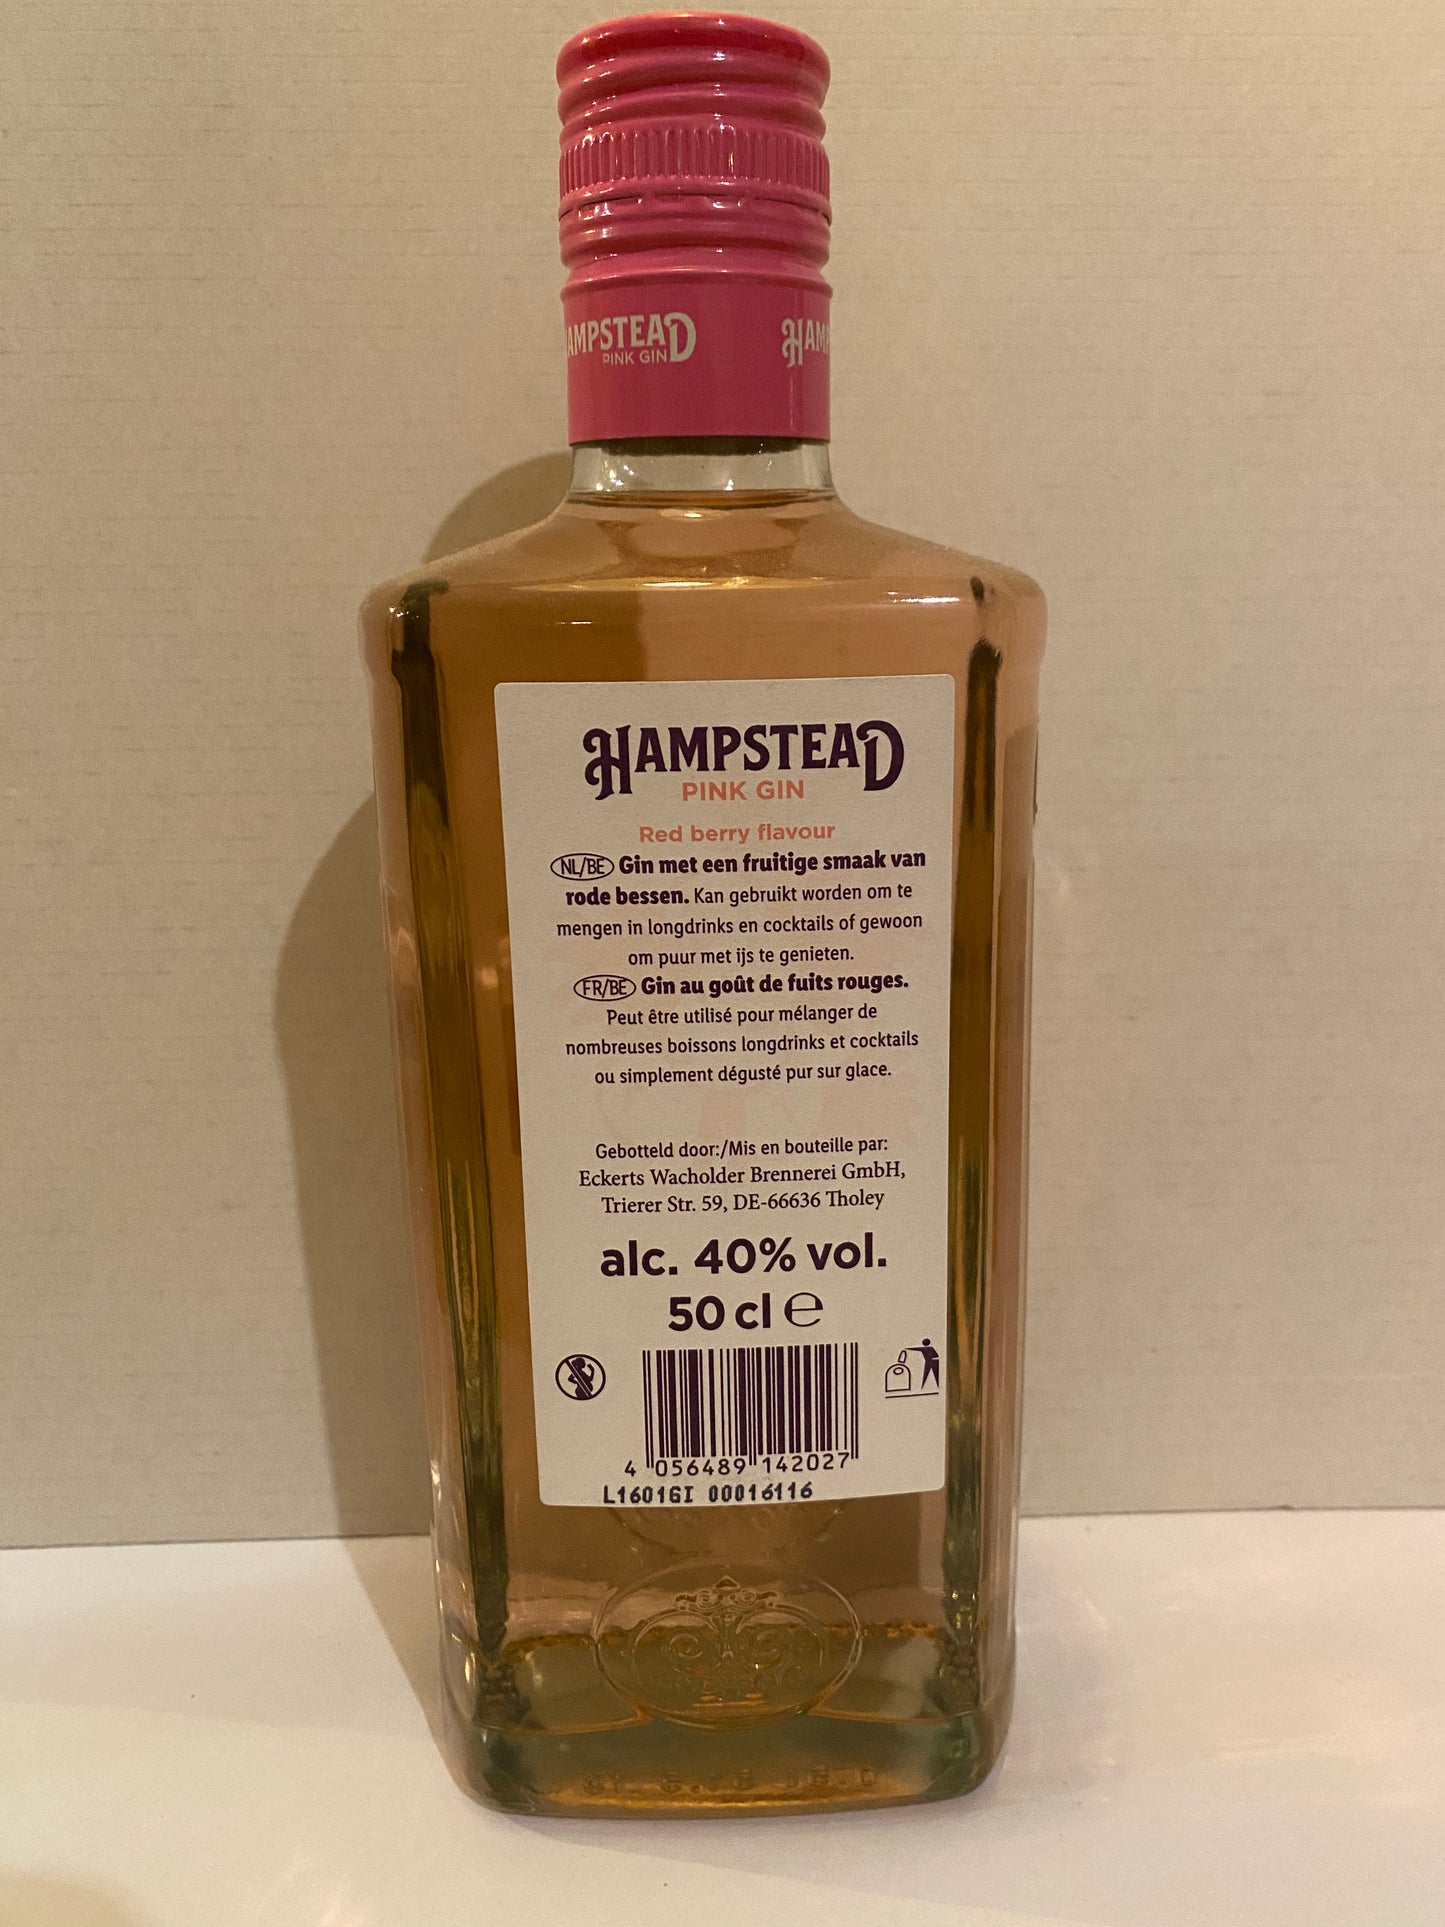 Hampstead Pink Gin – House of Gin